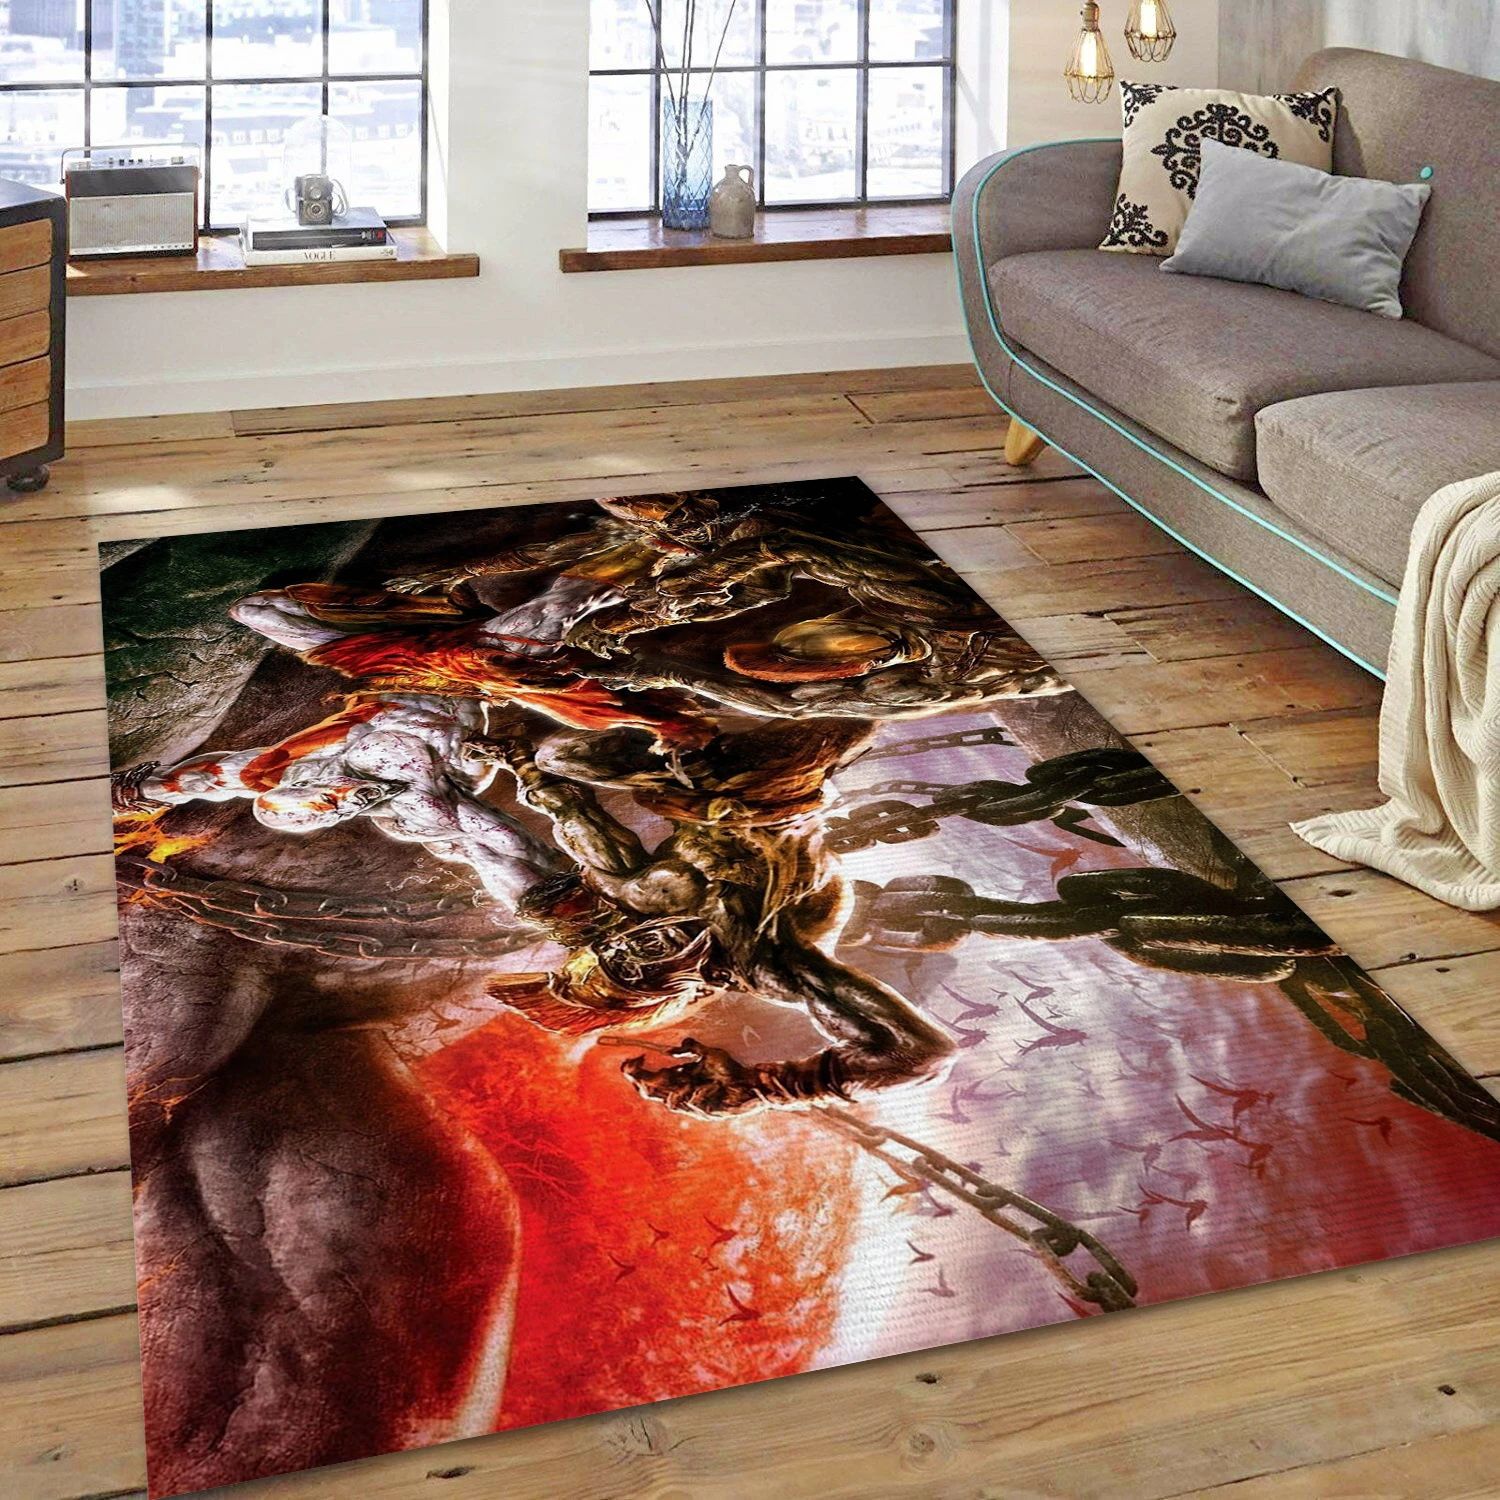 God Of War Video Game Area Rug Area, Living Room Rug - Christmas Gift Decor - Indoor Outdoor Rugs 1